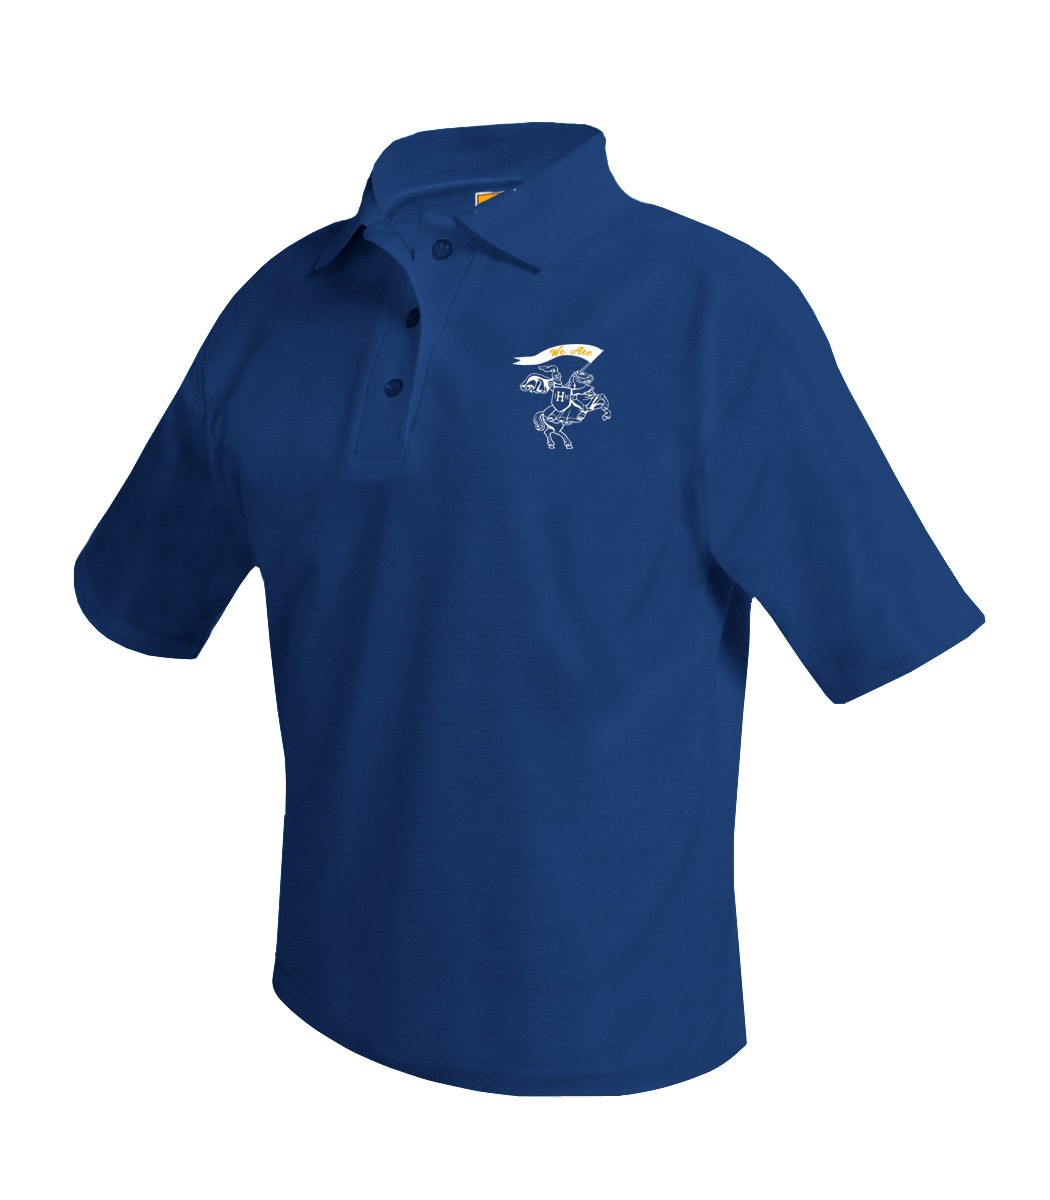 IHM Spirit Dark Navy S/S Polo w/ White Knight Logo - Please Allow 2-3 Weeks for Delivery